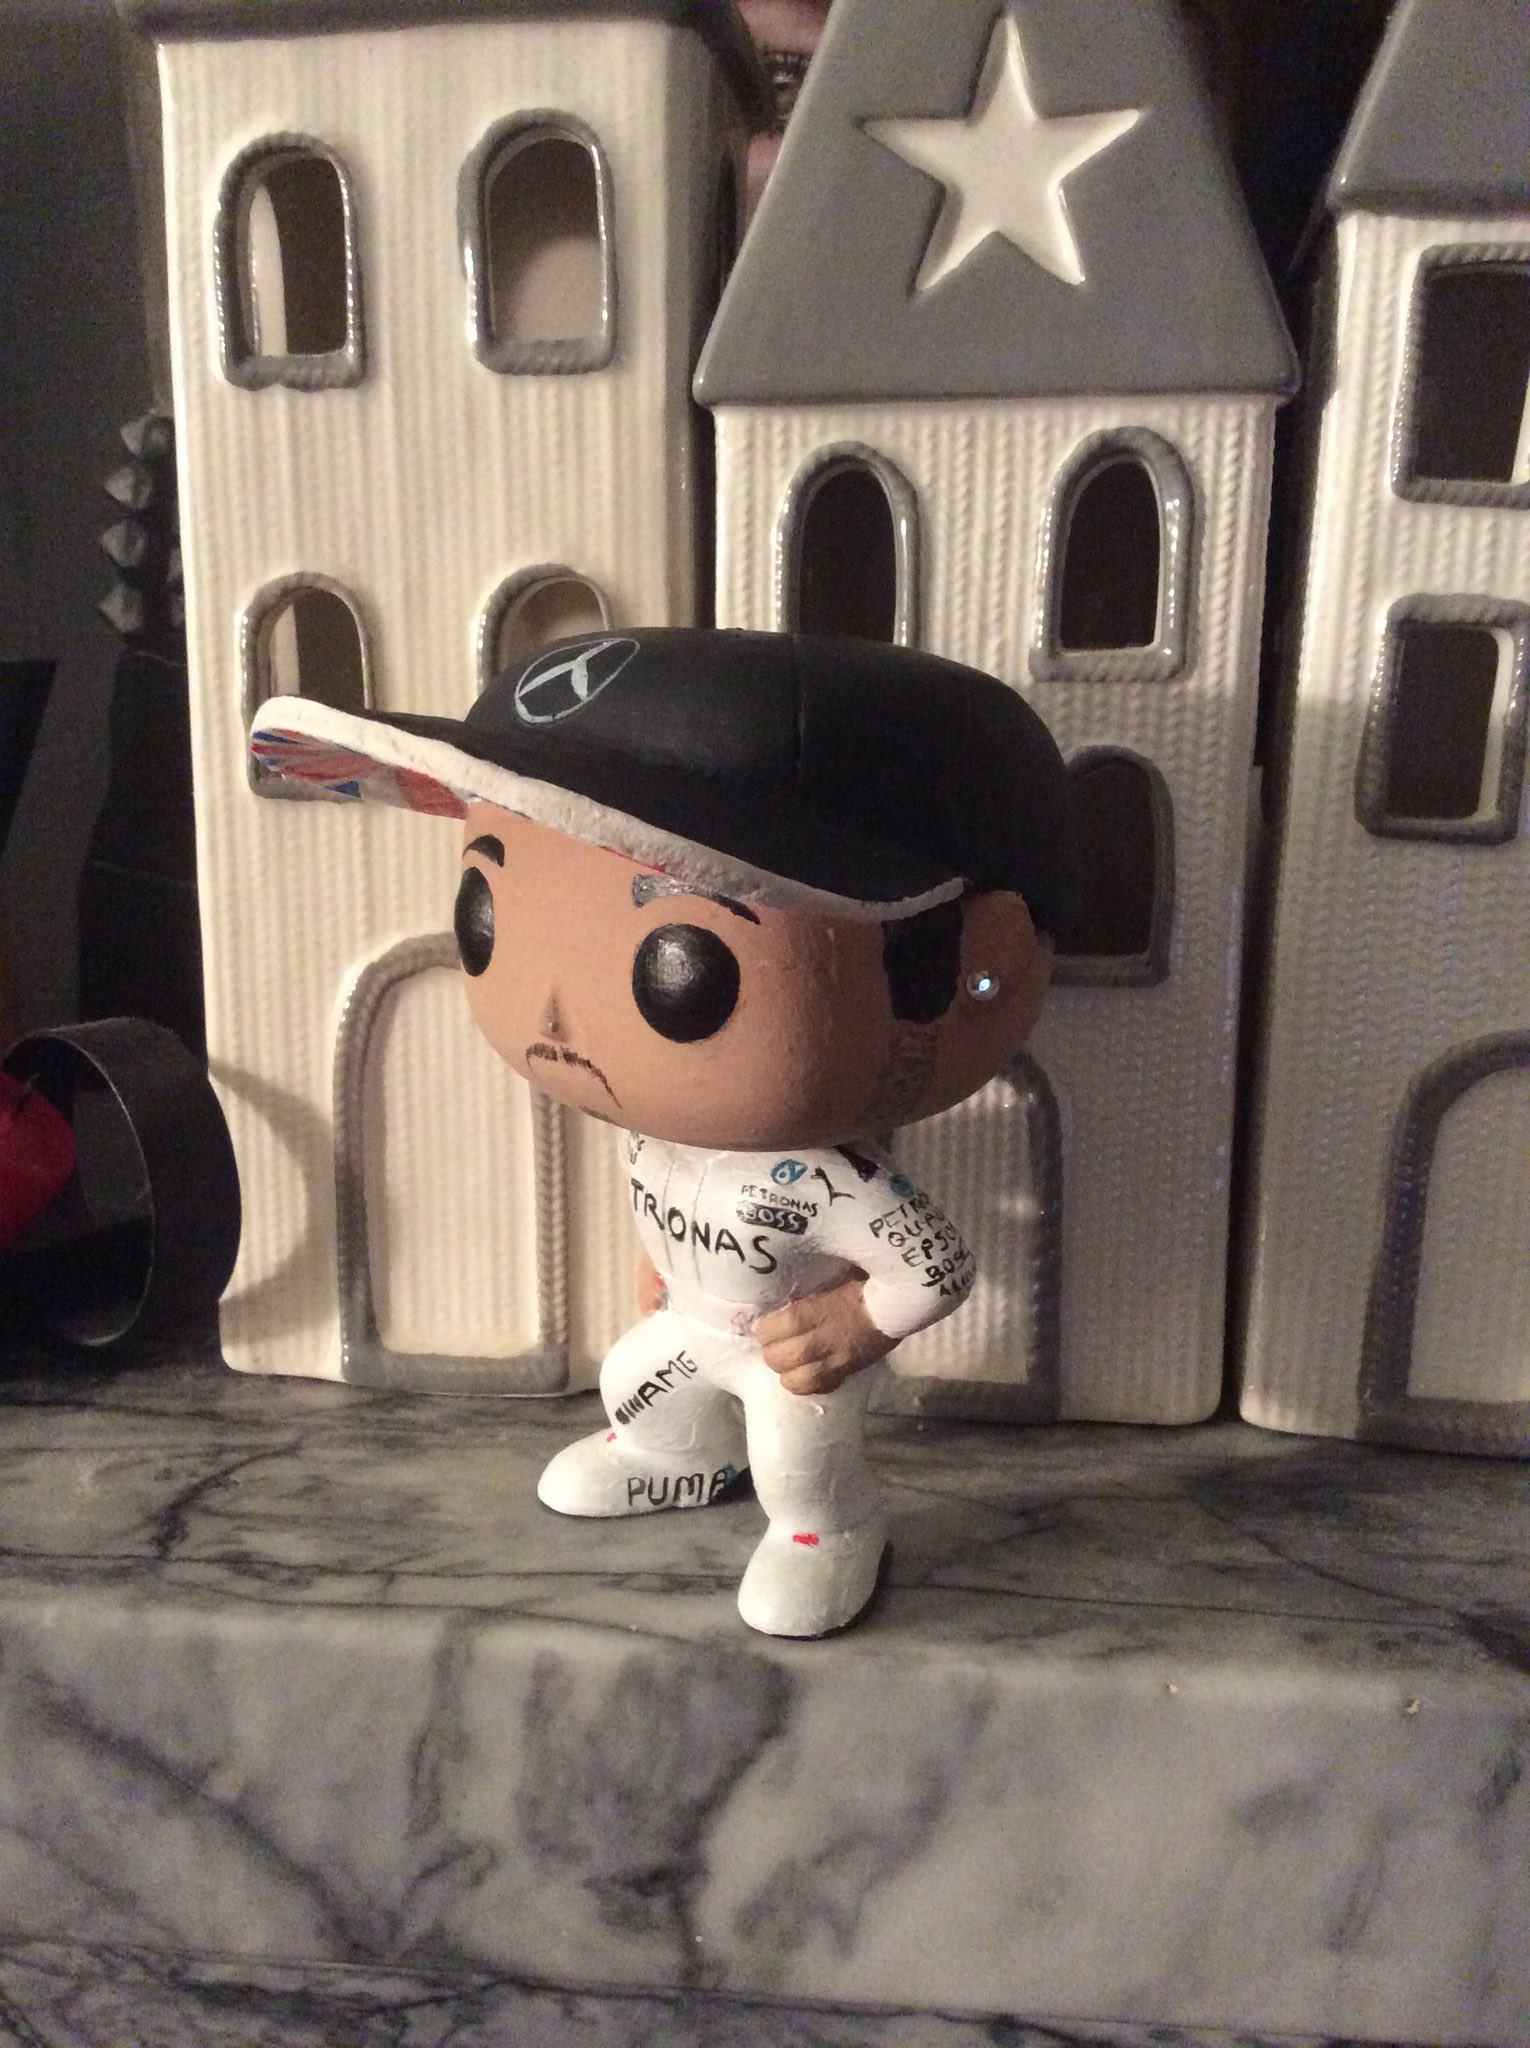 Justine Cairns on X: Just finished this Lewis Hamilton pop vinyl